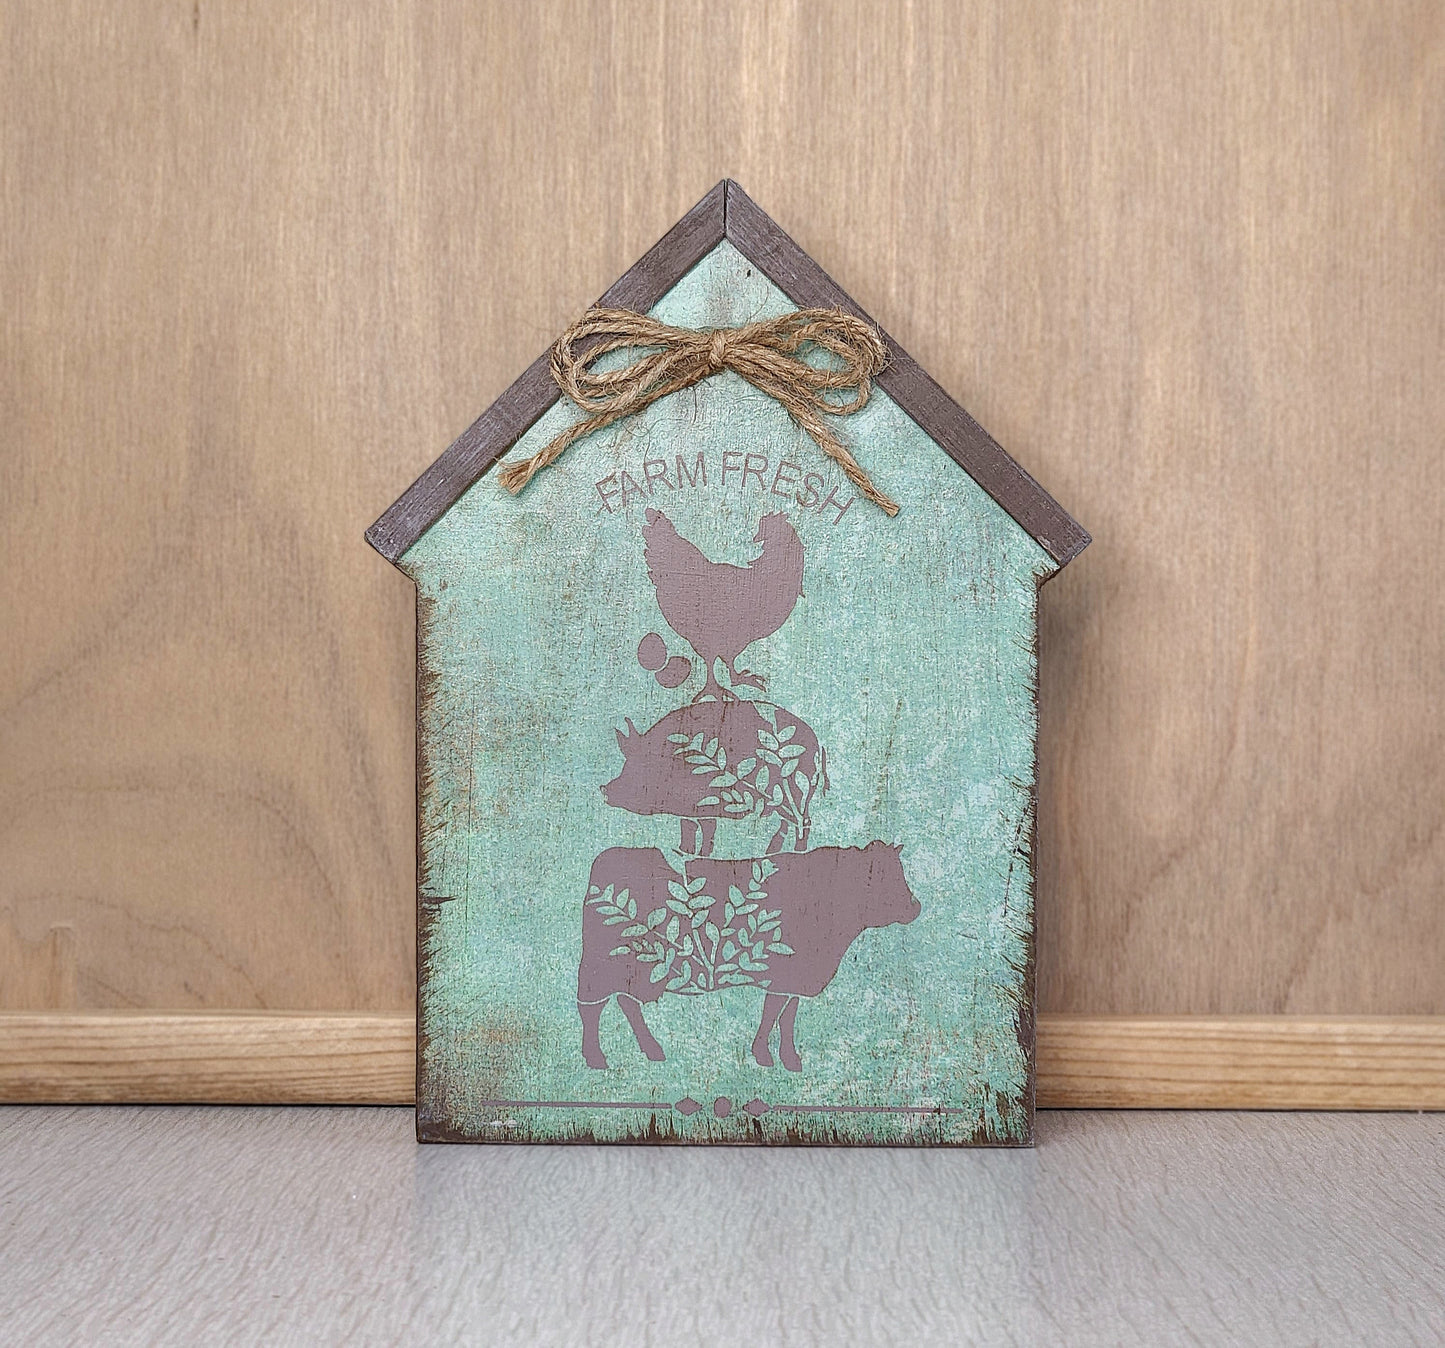 Wooden House Sign Decor - Variety